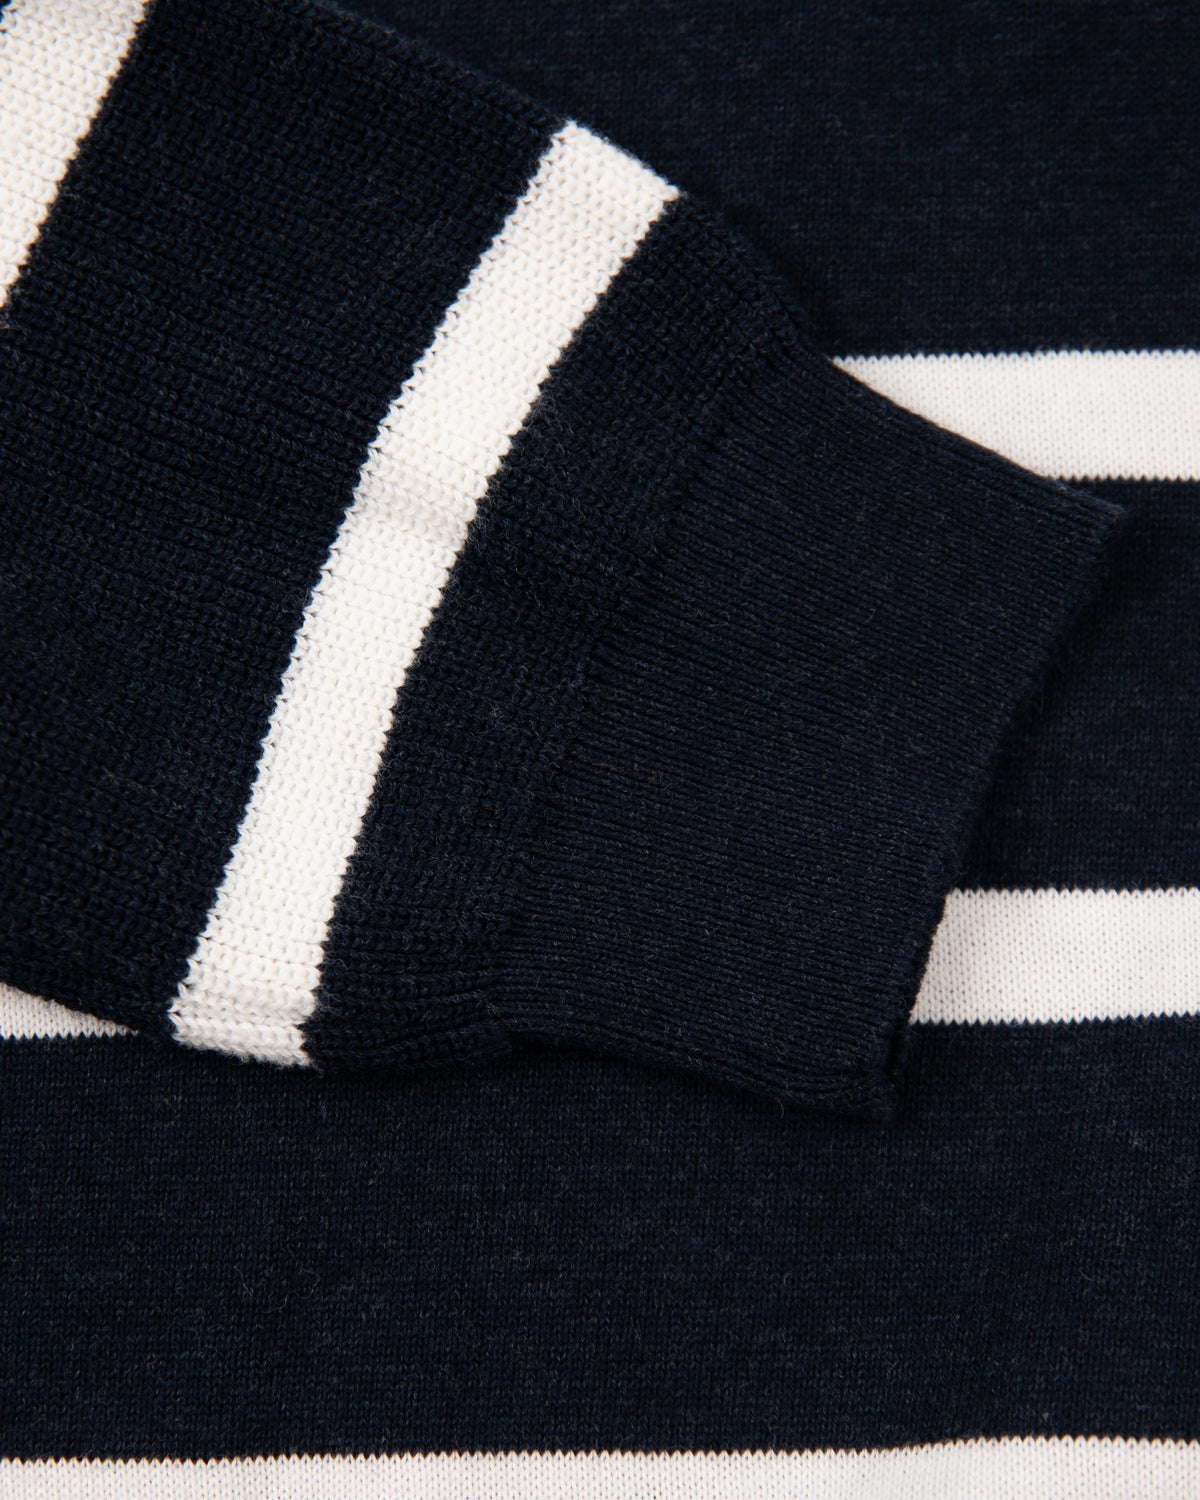 Rugby Shirt blue - Charcoal Navy | NZA New Zealand Auckland